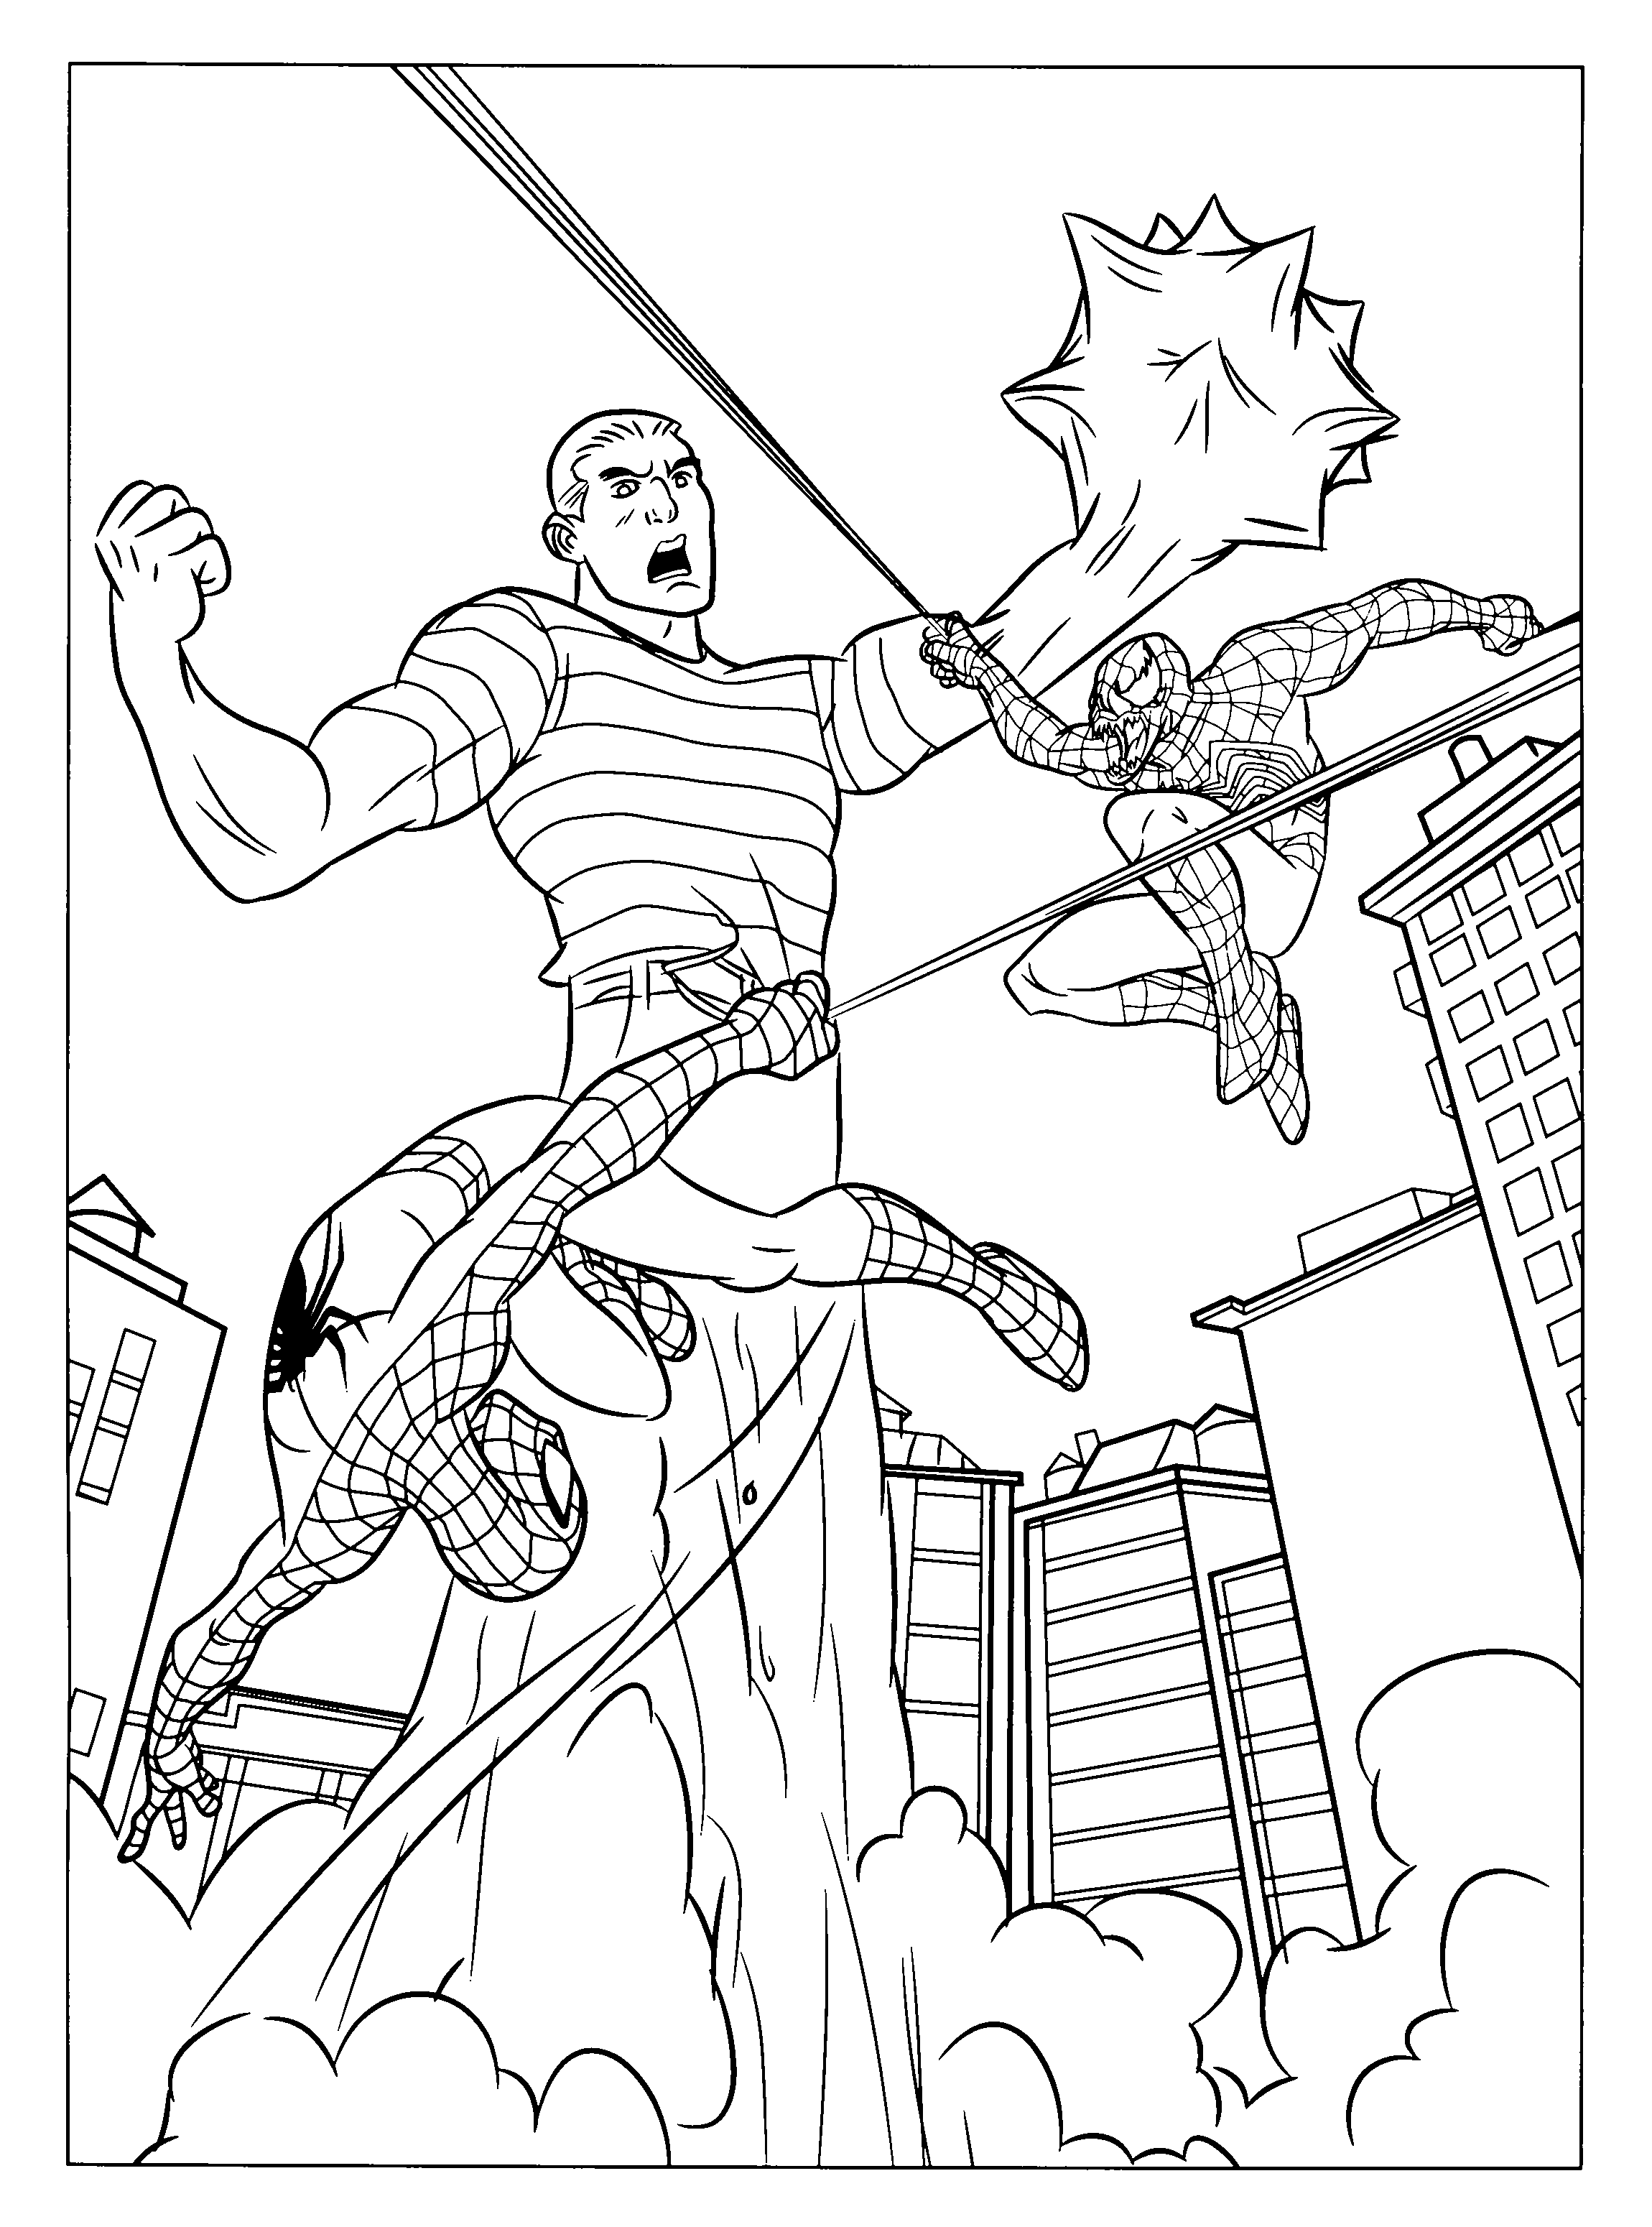 Spiderman 3 coloring pages | Spiderman coloring, Coloring books ...